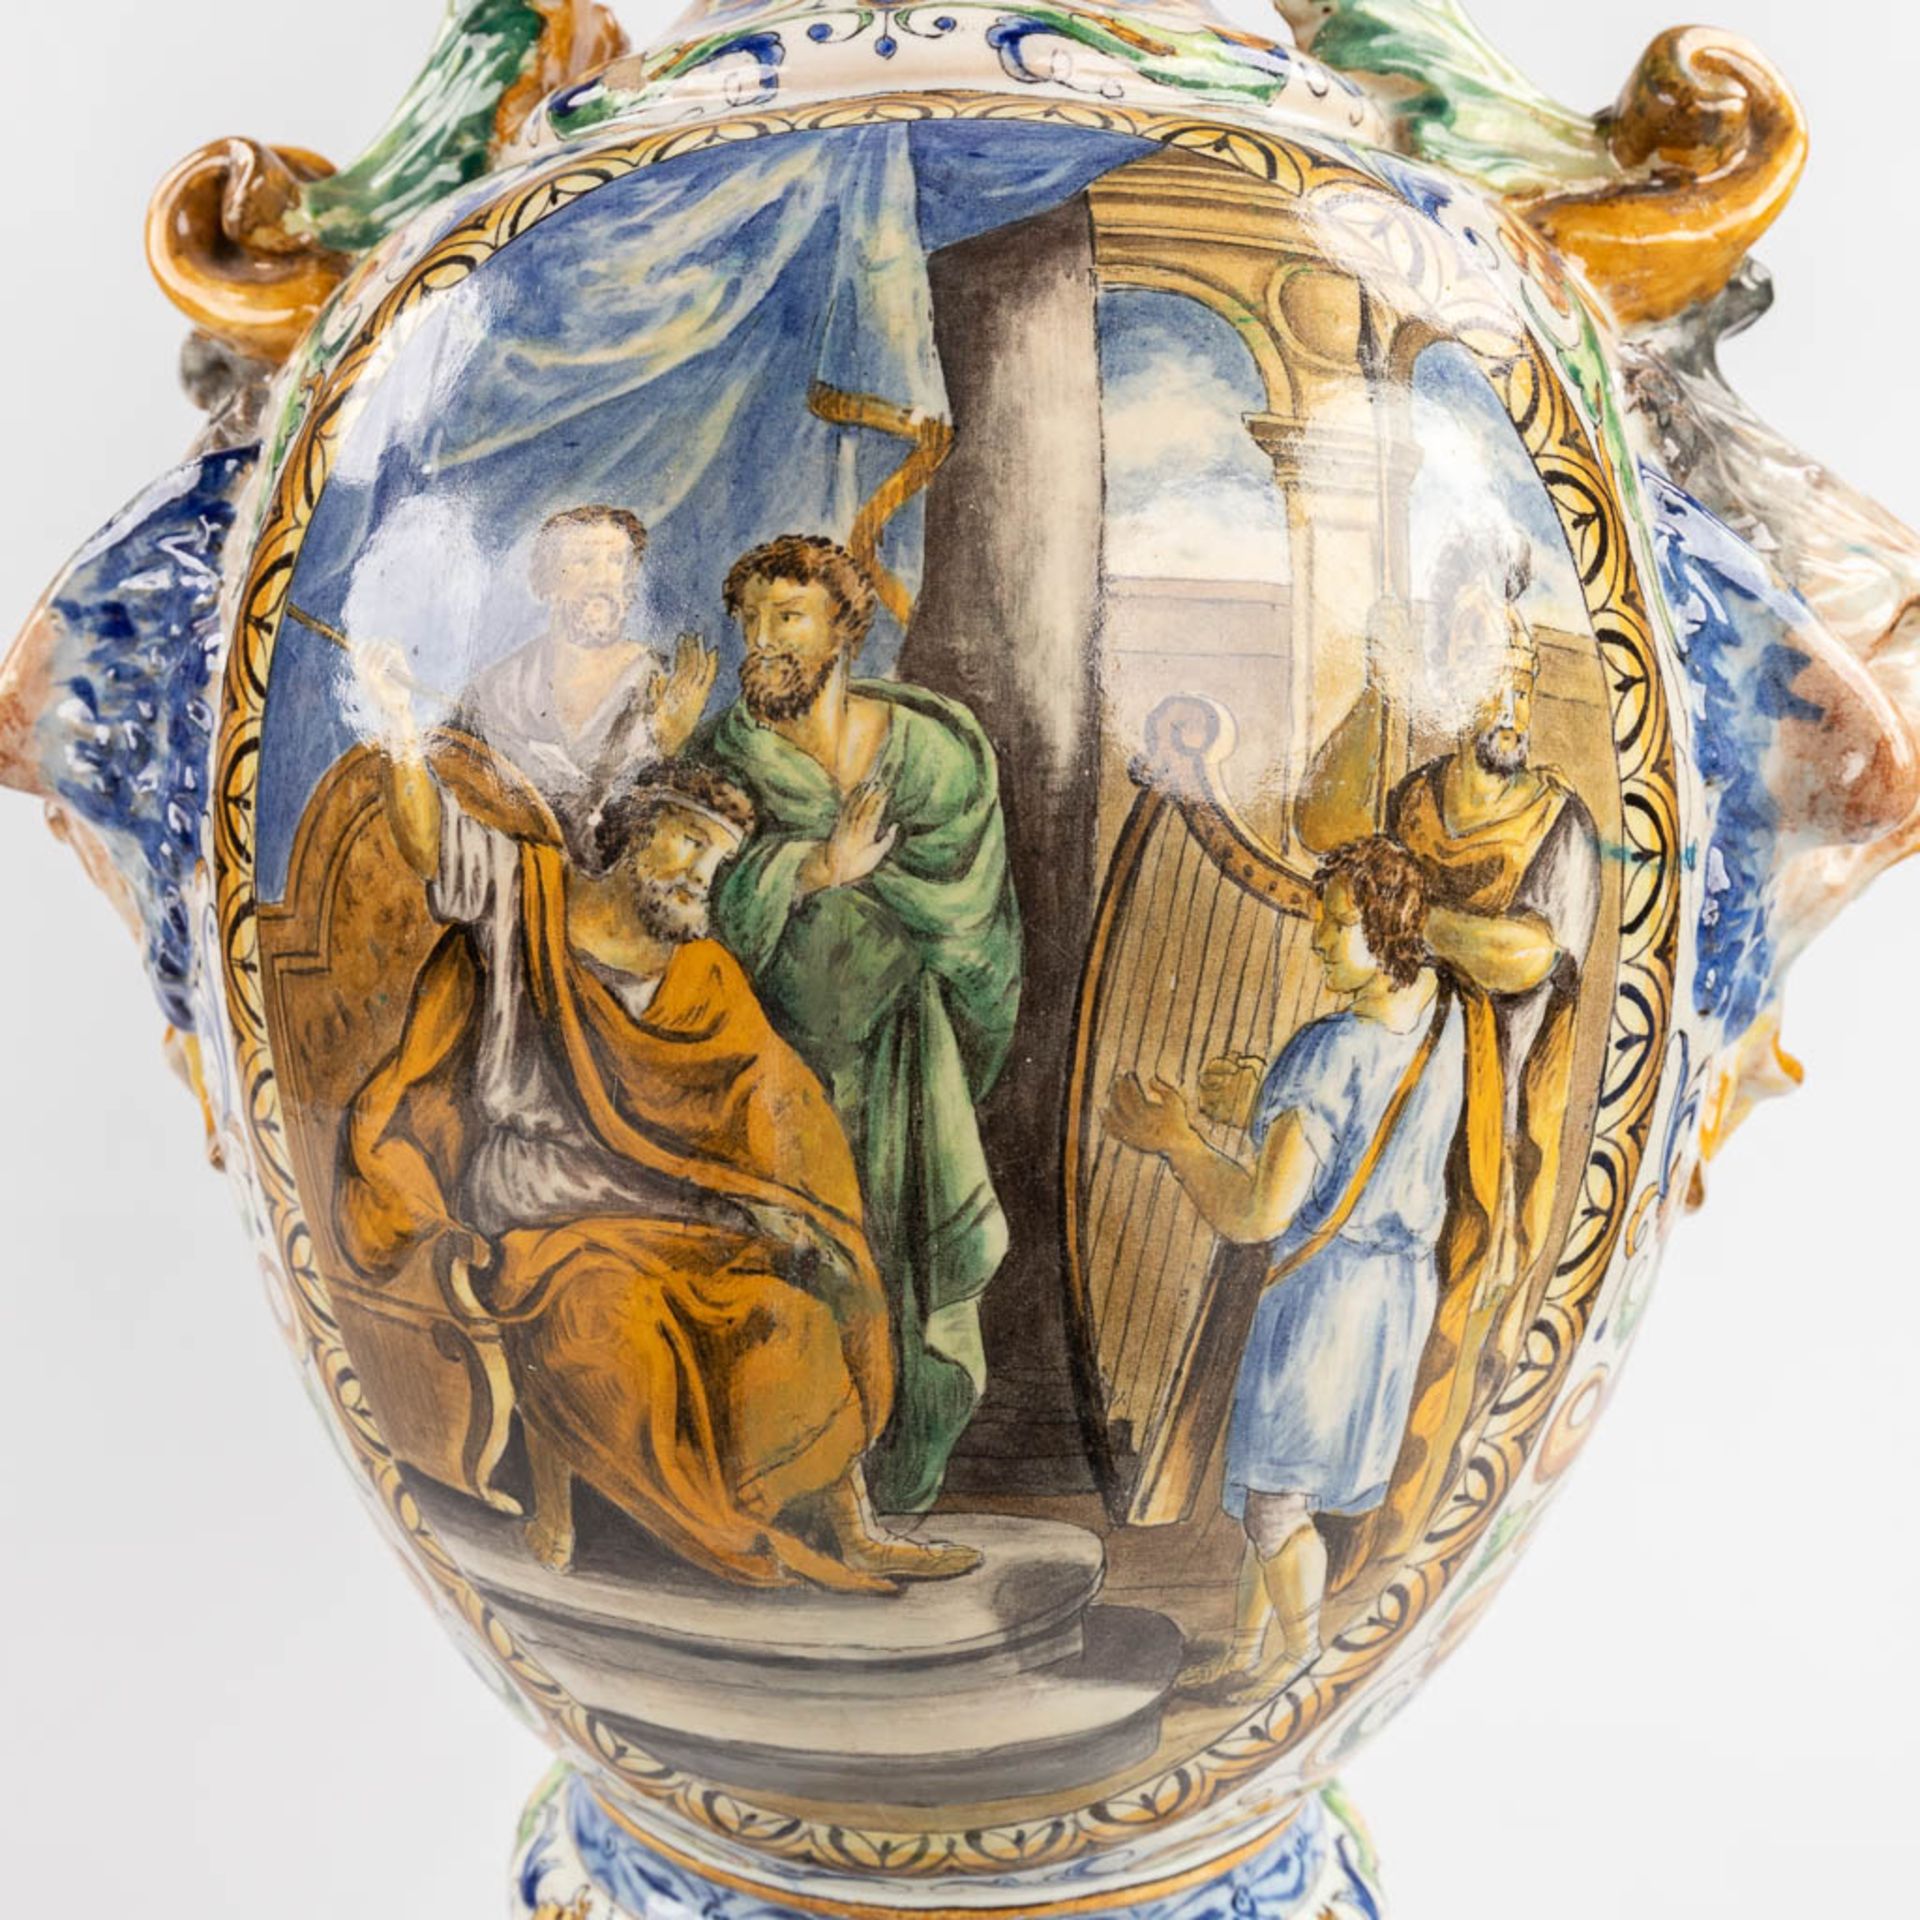 A pair of large vases, Italian Renaissance style, glazed faience. 20th C. (D:45 x W:45 x H:205 cm) - Image 17 of 31